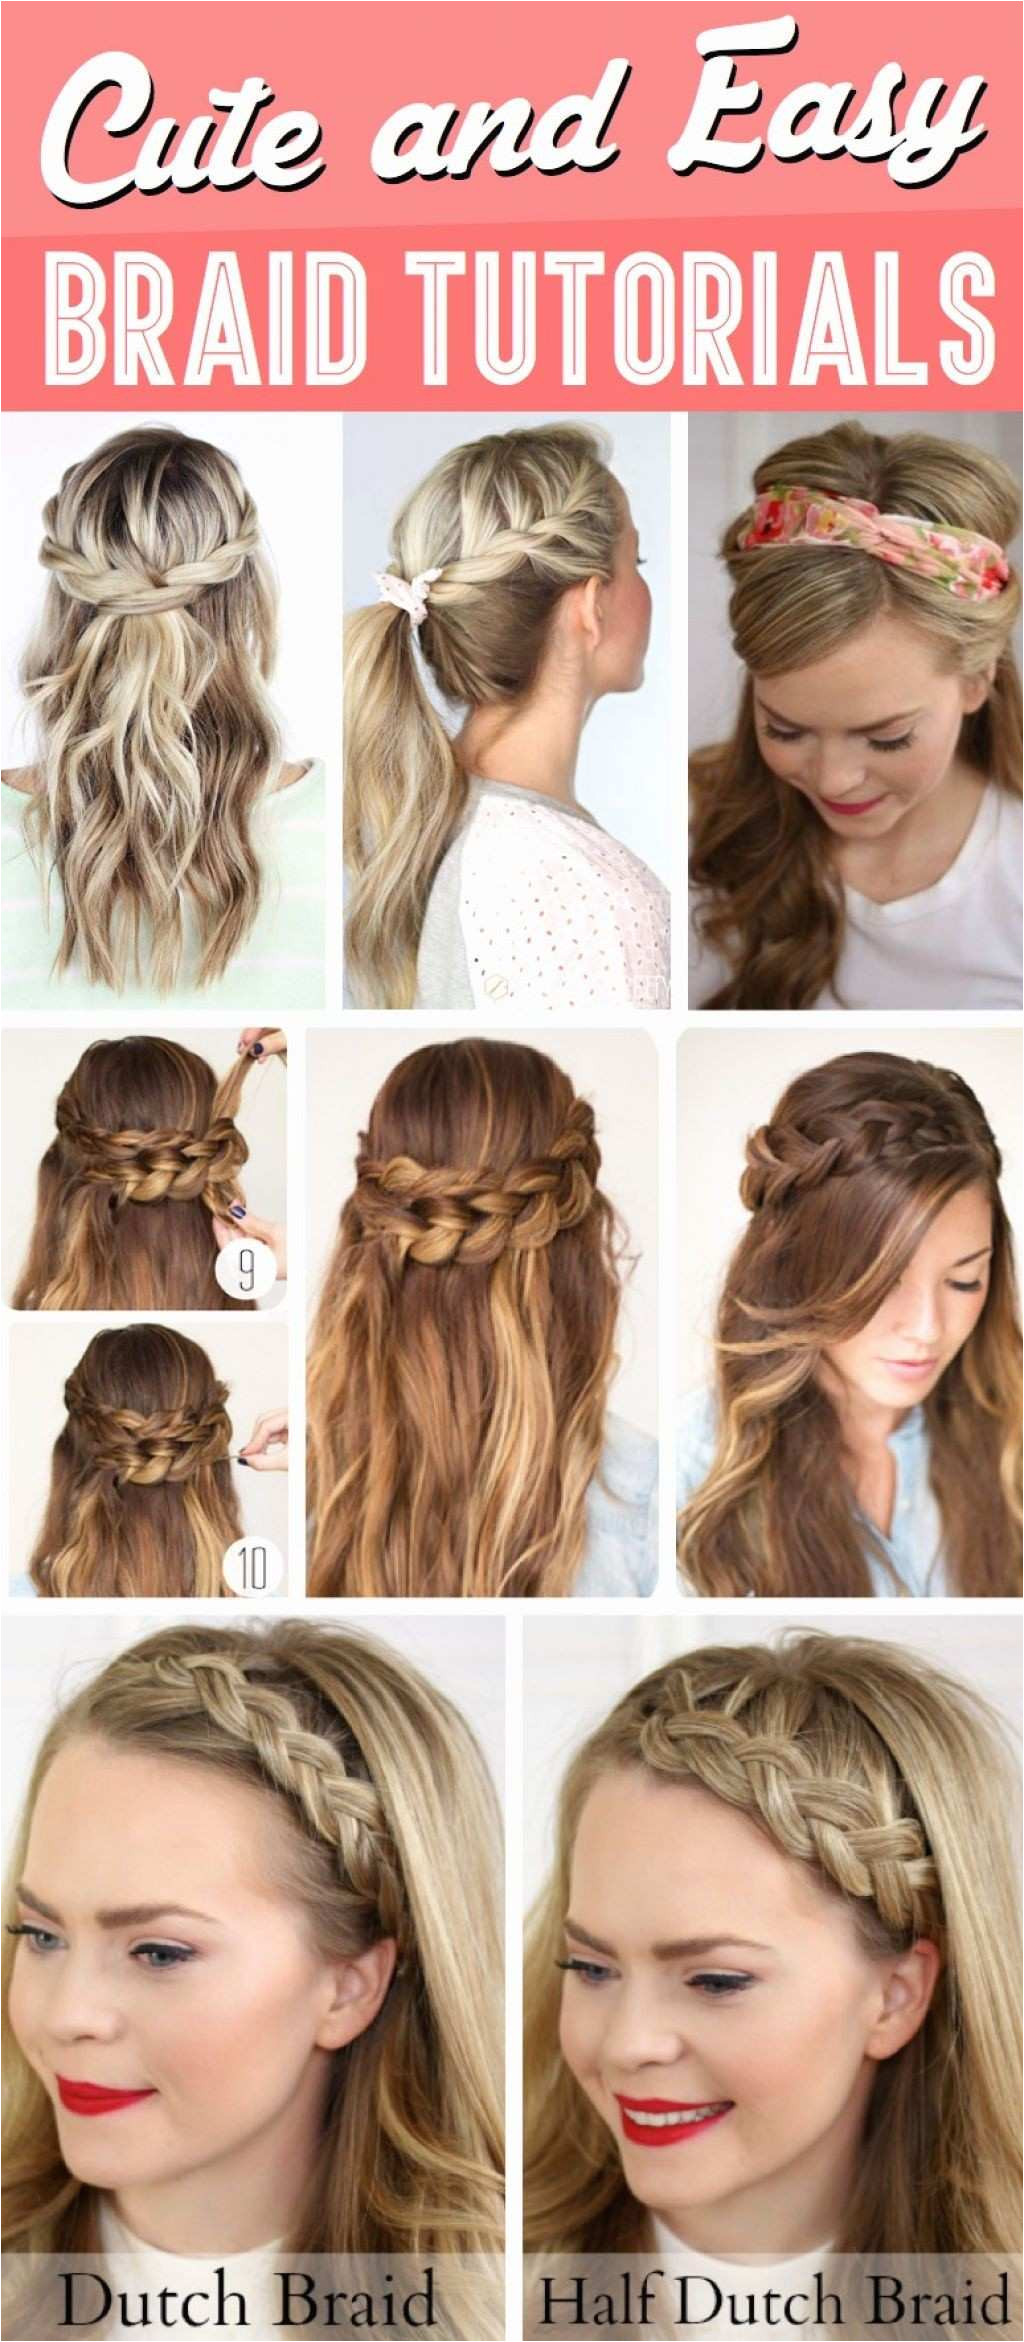 Cool Hairstyles for Girls with Long Hair for School Luxury Beautiful Hairstyles for Short Hair for